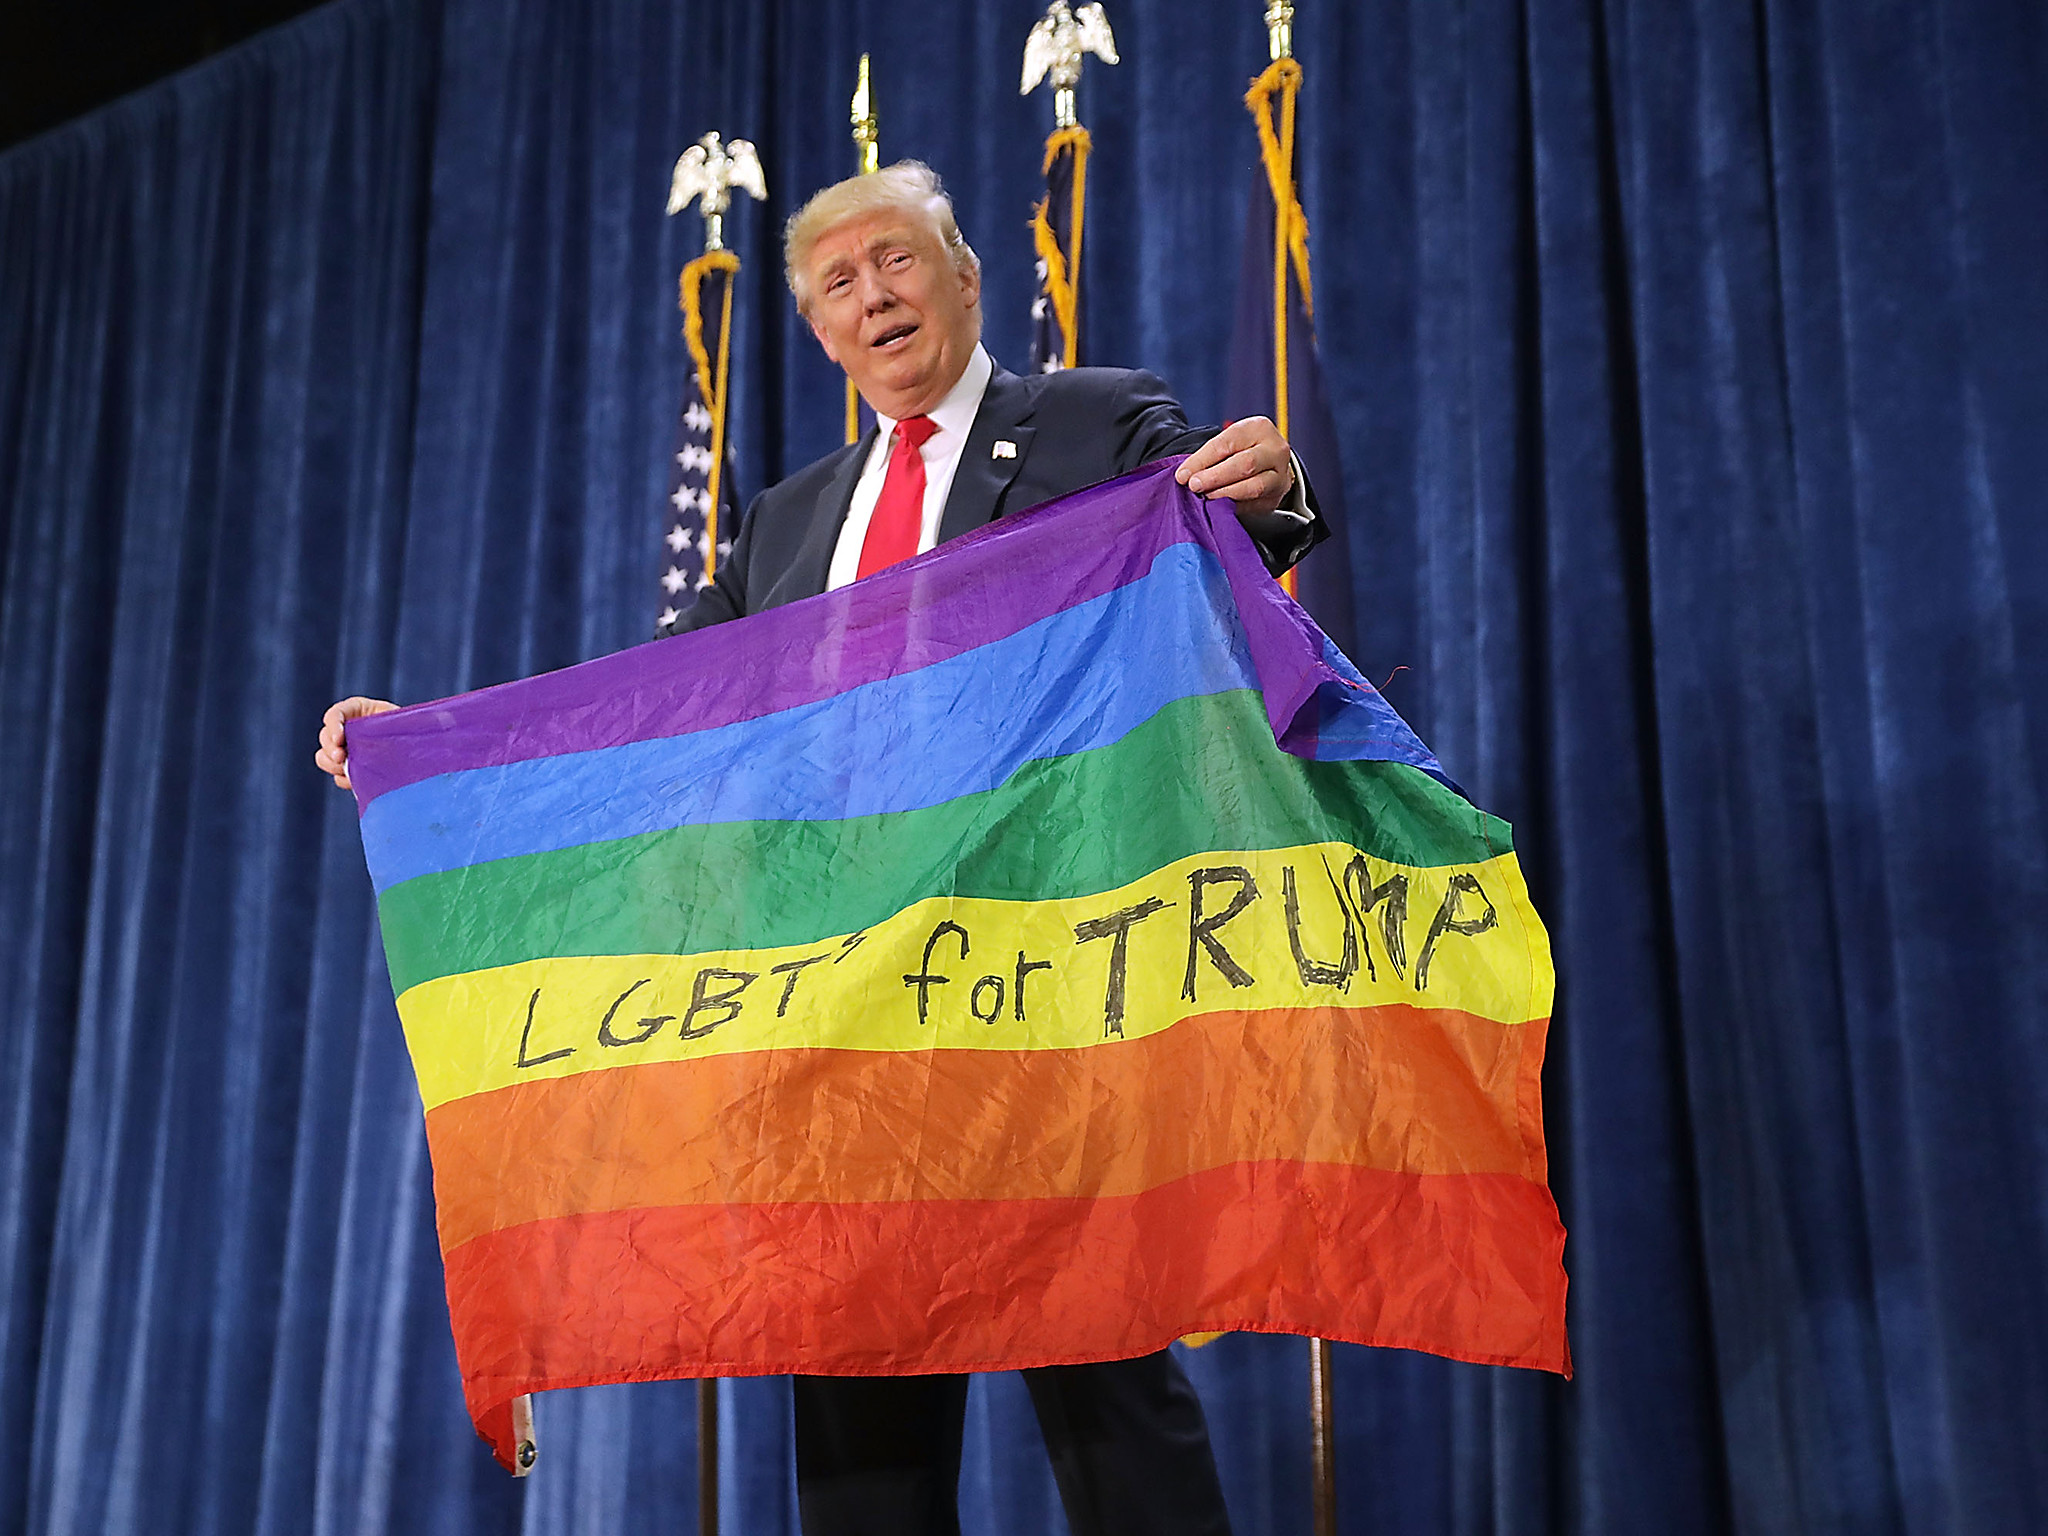 2048x1536 Donald Trump's running mate thought HIV funding could be better spent on  gay conversion therapy – time to put the rainbow flag down | The Independent